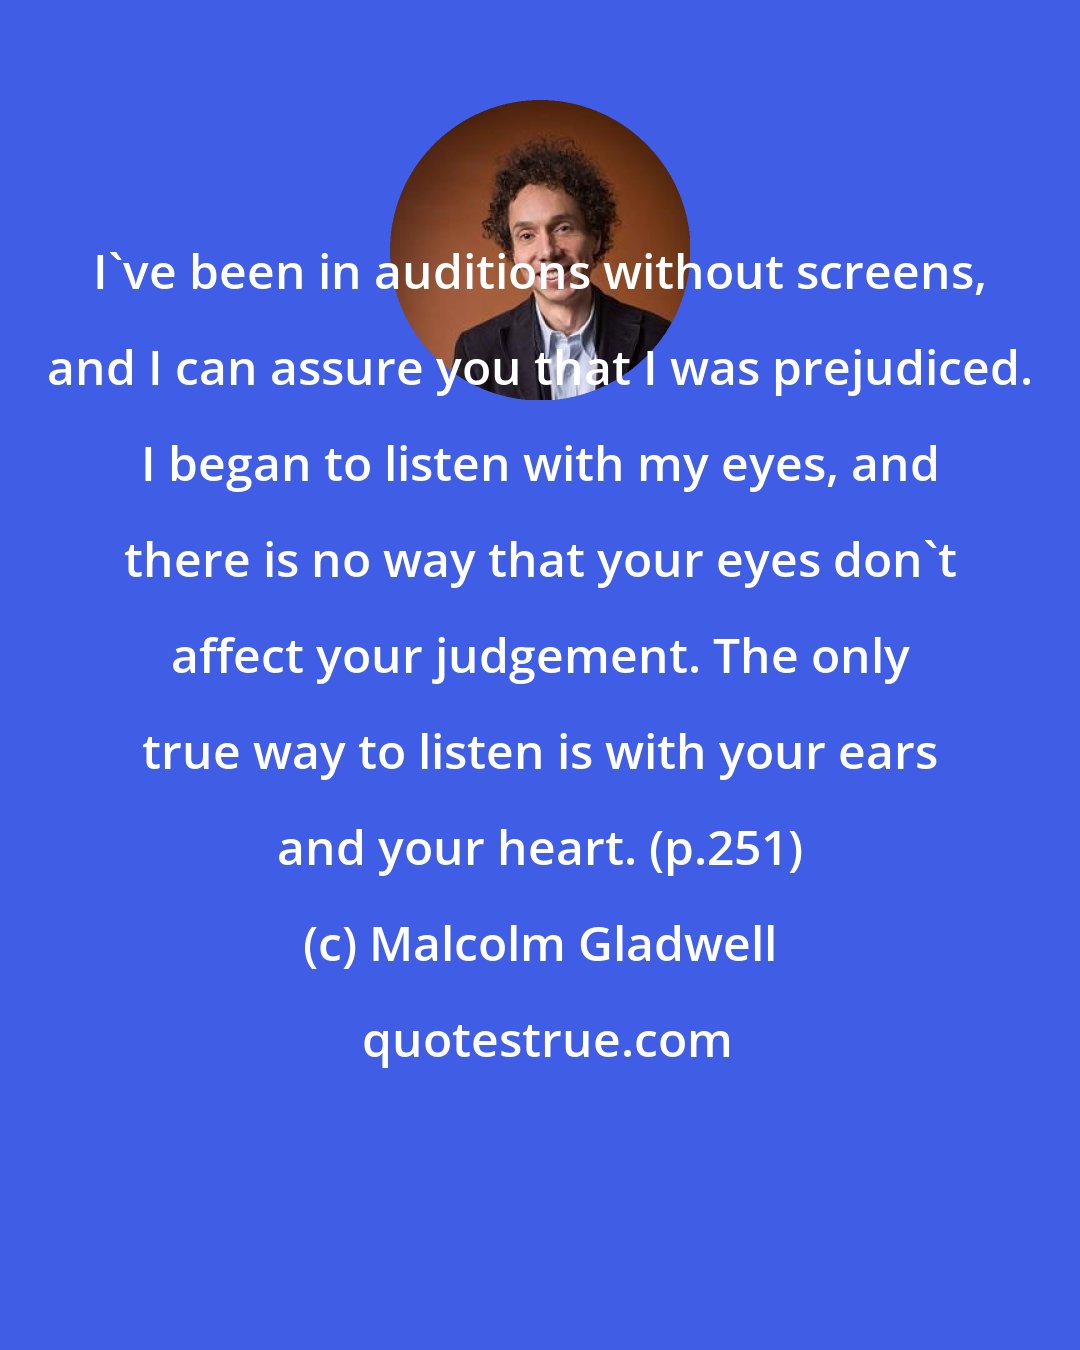 Malcolm Gladwell: I've been in auditions without screens, and I can assure you that I was prejudiced. I began to listen with my eyes, and there is no way that your eyes don't affect your judgement. The only true way to listen is with your ears and your heart. (p.251)